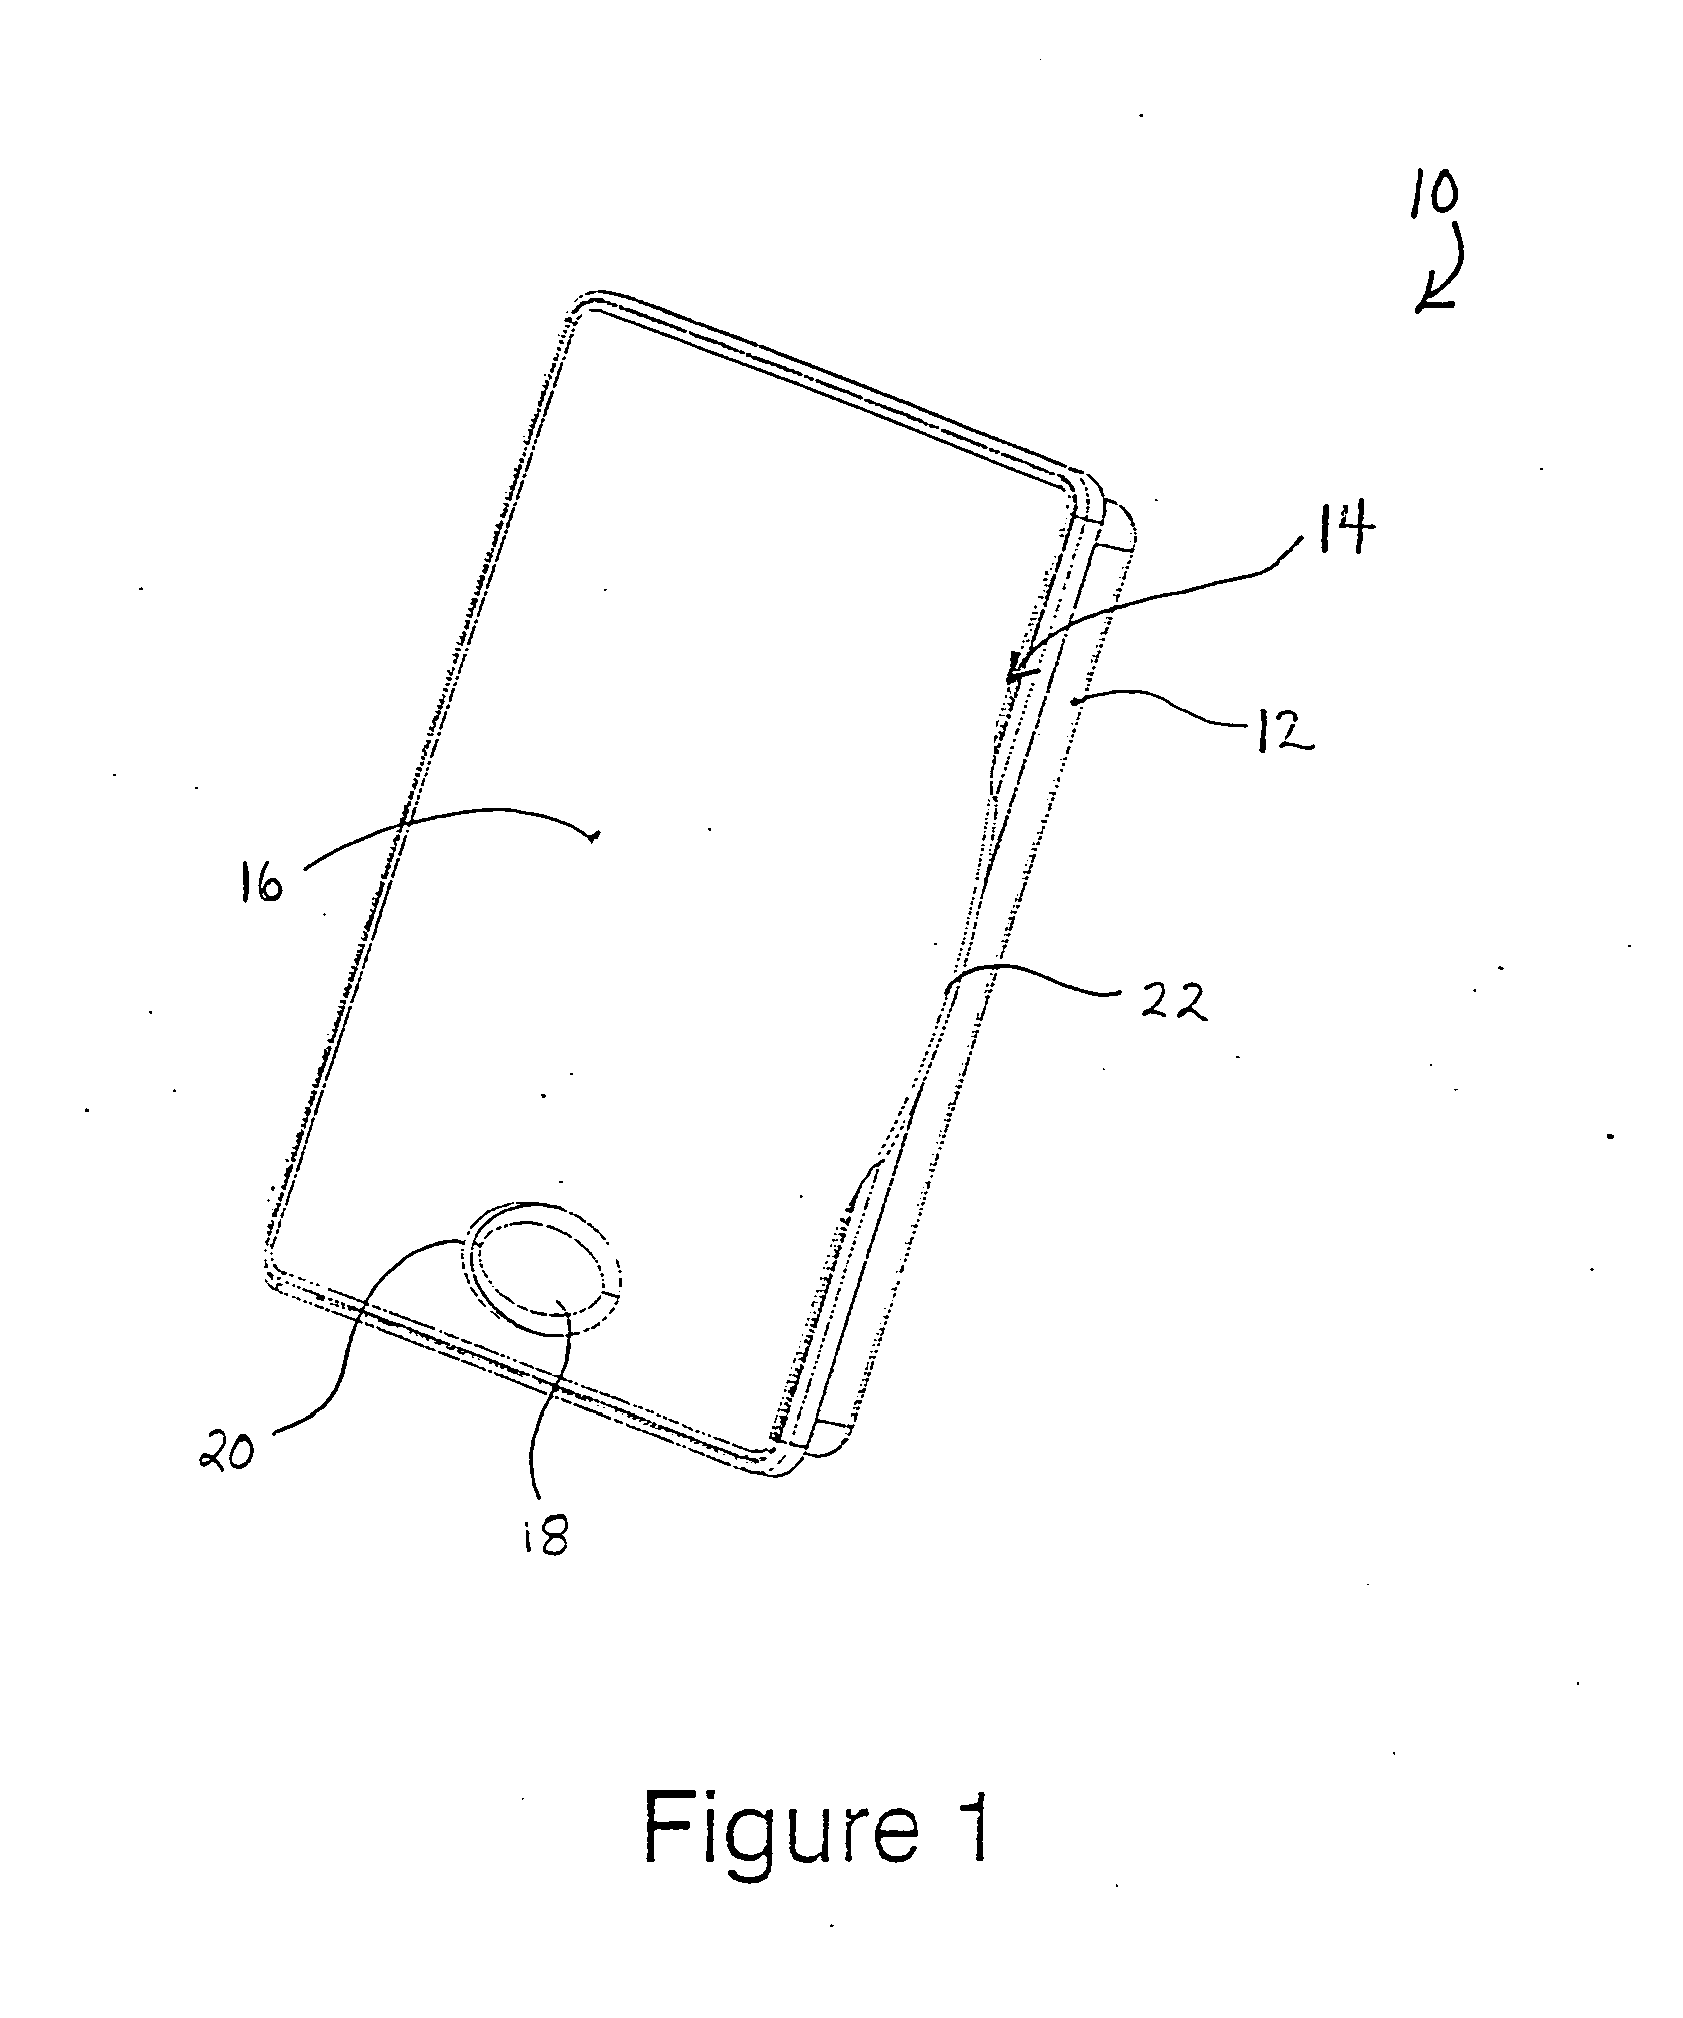 Pocket-size talking card or pamphlet device and packages containing the same